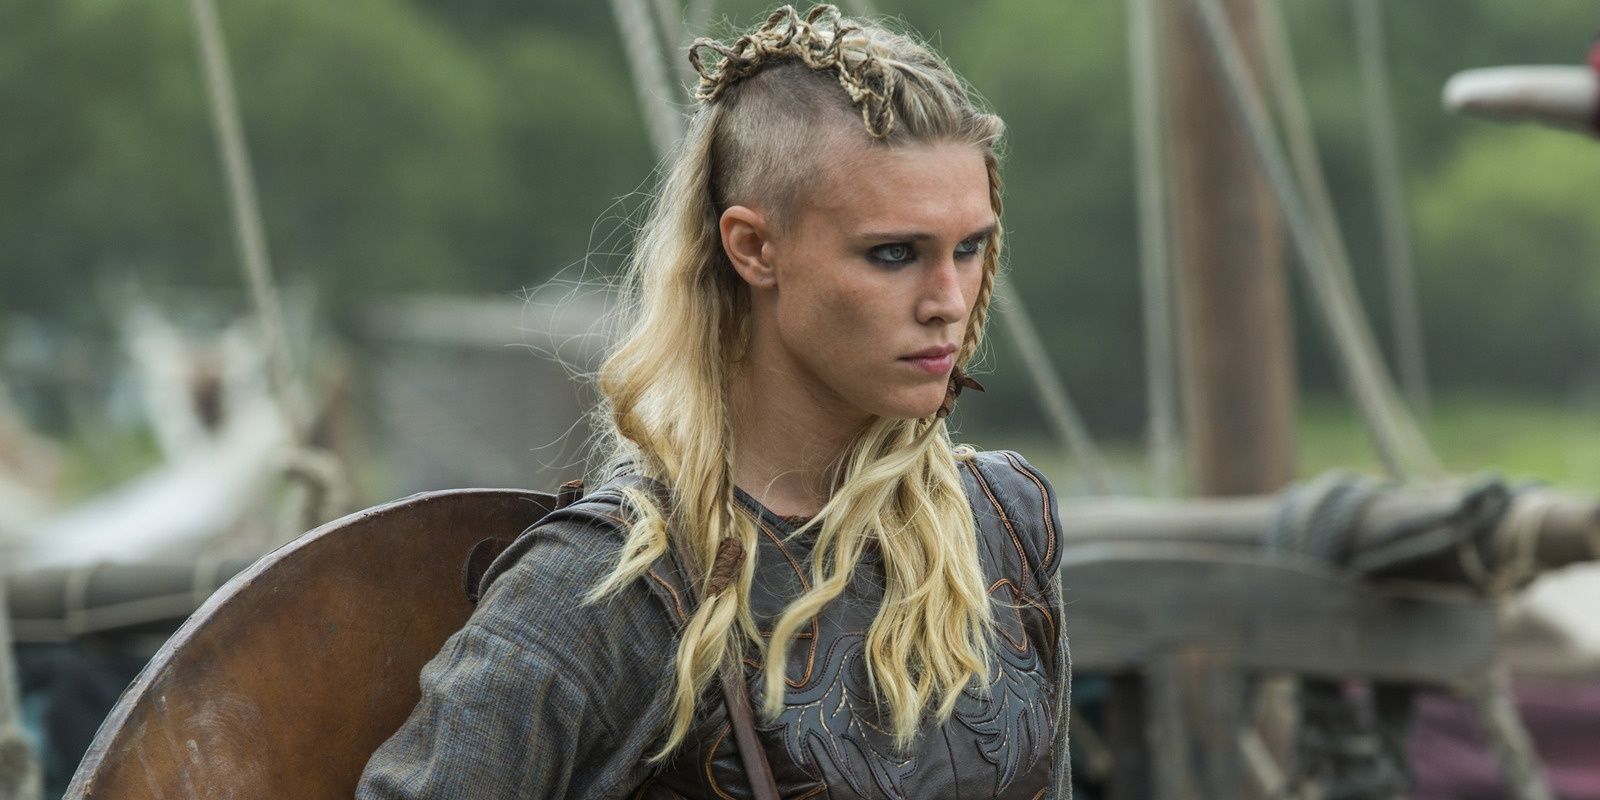 26 Stylish Viking Hairstyles For Men in 2023